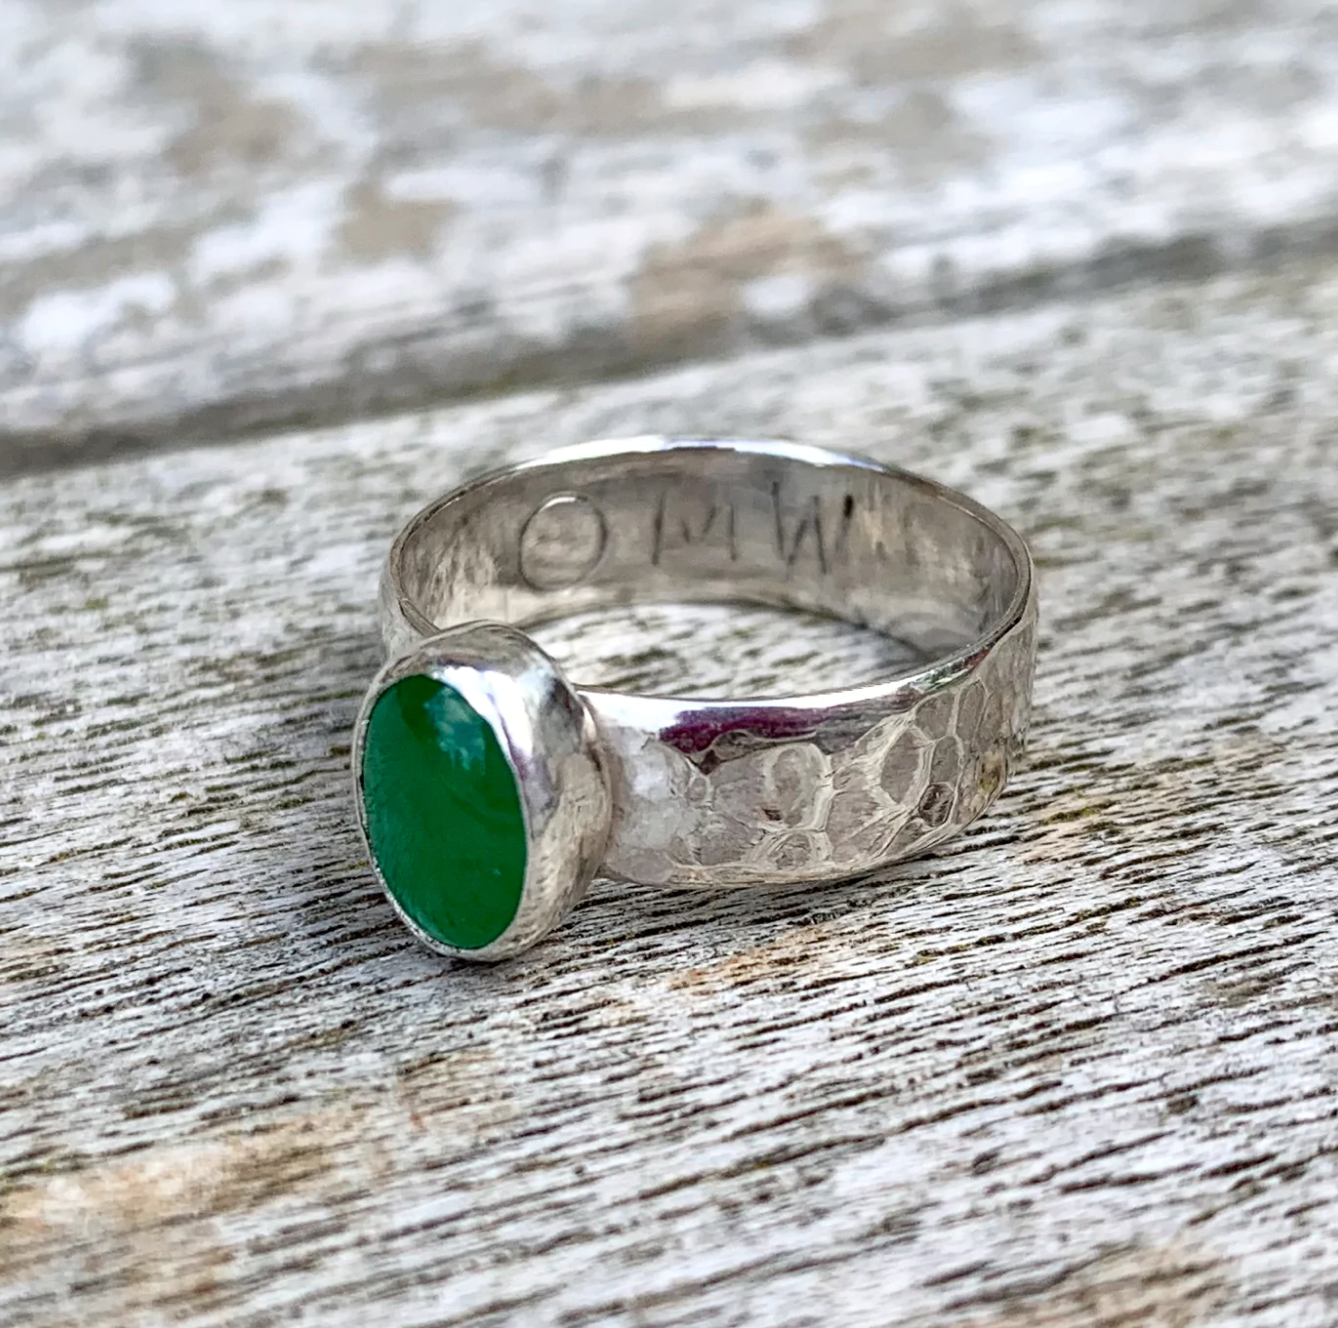 Small oval gemstone ring with engraving